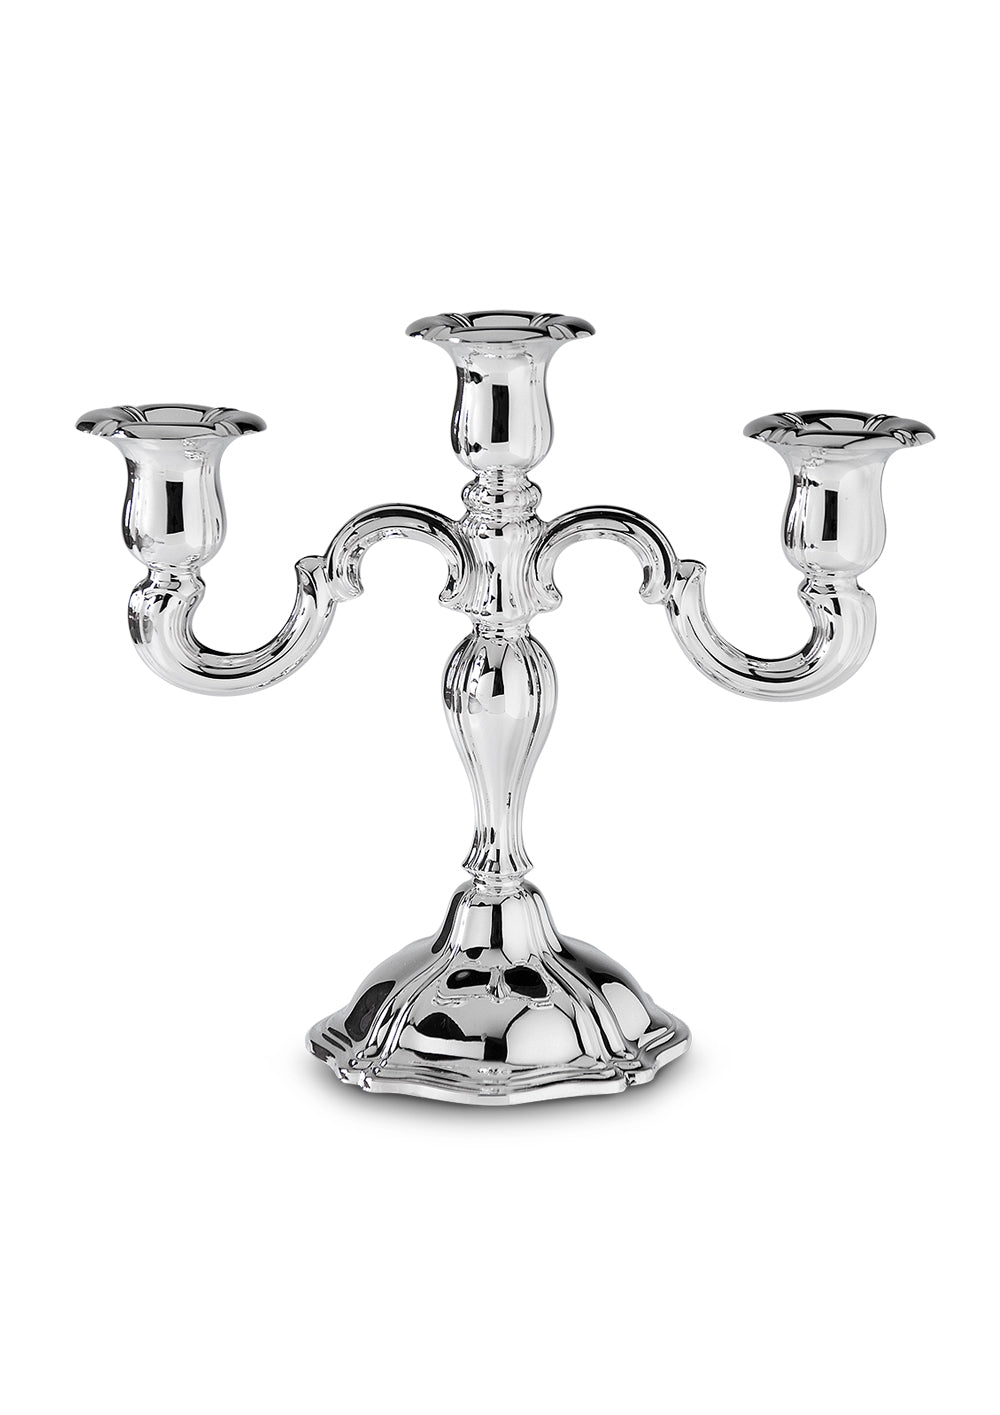 Candlestick 3 arms in silver